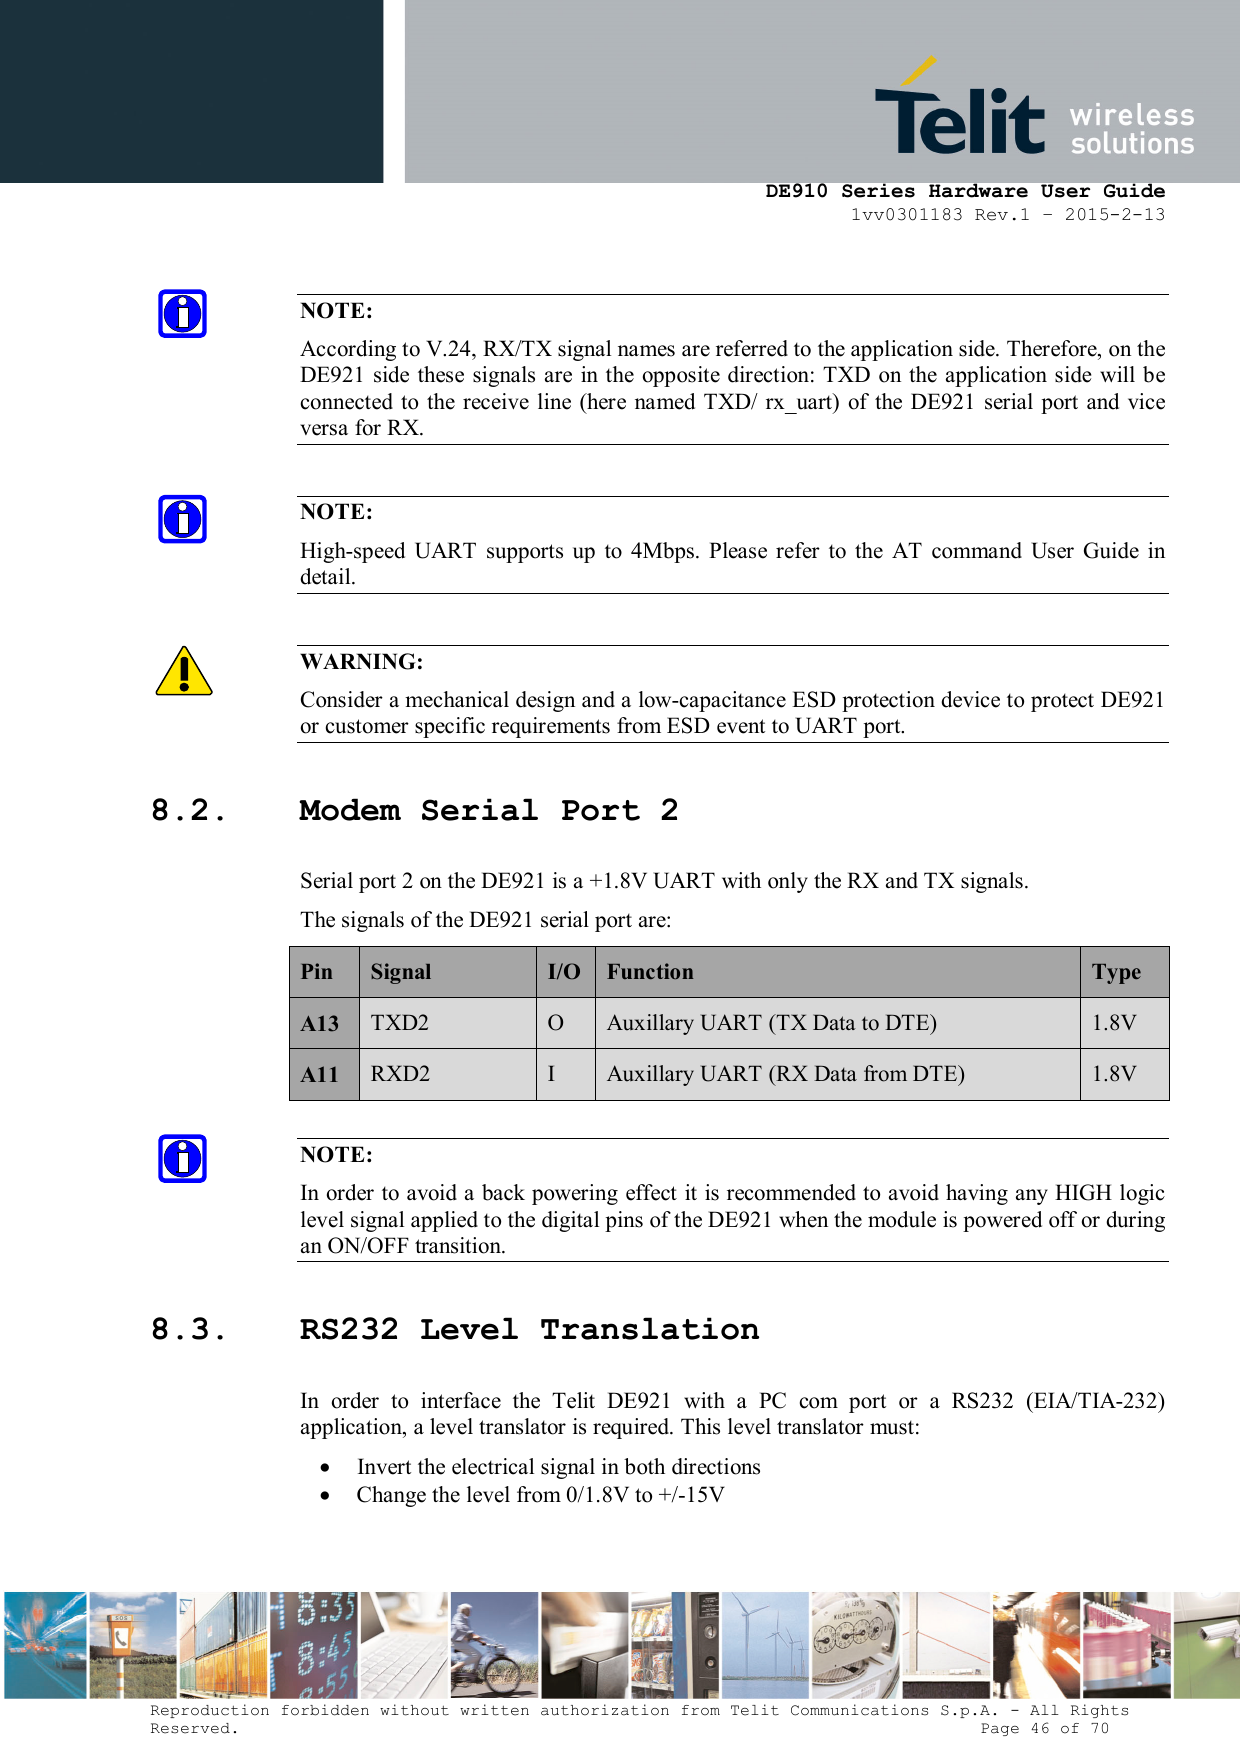      DE910 Series Hardware User Guide 1vv0301183 Rev.1 – 2015-2-13 Reproduction forbidden without written authorization from Telit Communications S.p.A. - All Rights Reserved.                                                                          Page 46 of 70  NOTE: According to V.24, RX/TX signal names are referred to the application side. Therefore, on the DE921 side these signals are in  the  opposite  direction: TXD on the application side  will be connected to  the  receive  line (here  named  TXD/ rx_uart)  of  the  DE921  serial port and vice versa for RX.  NOTE: High-speed  UART  supports  up  to  4Mbps.  Please  refer  to  the  AT  command  User  Guide  in detail.  WARNING: Consider a mechanical design and a low-capacitance ESD protection device to protect DE921 or customer specific requirements from ESD event to UART port. 8.2. Modem Serial Port 2 Serial port 2 on the DE921 is a +1.8V UART with only the RX and TX signals.  The signals of the DE921 serial port are: Pin  Signal  I/O Function  Type A13  TXD2  O  Auxillary UART (TX Data to DTE)  1.8V A11  RXD2  I  Auxillary UART (RX Data from DTE)  1.8V NOTE: In order to avoid a back powering effect it is recommended to avoid having any HIGH logic level signal applied to the digital pins of the DE921 when the module is powered off or during an ON/OFF transition. 8.3. RS232 Level Translation In  order  to  interface  the  Telit  DE921  with  a  PC  com  port  or  a  RS232  (EIA/TIA-232) application, a level translator is required. This level translator must:  Invert the electrical signal in both directions  Change the level from 0/1.8V to +/-15V   